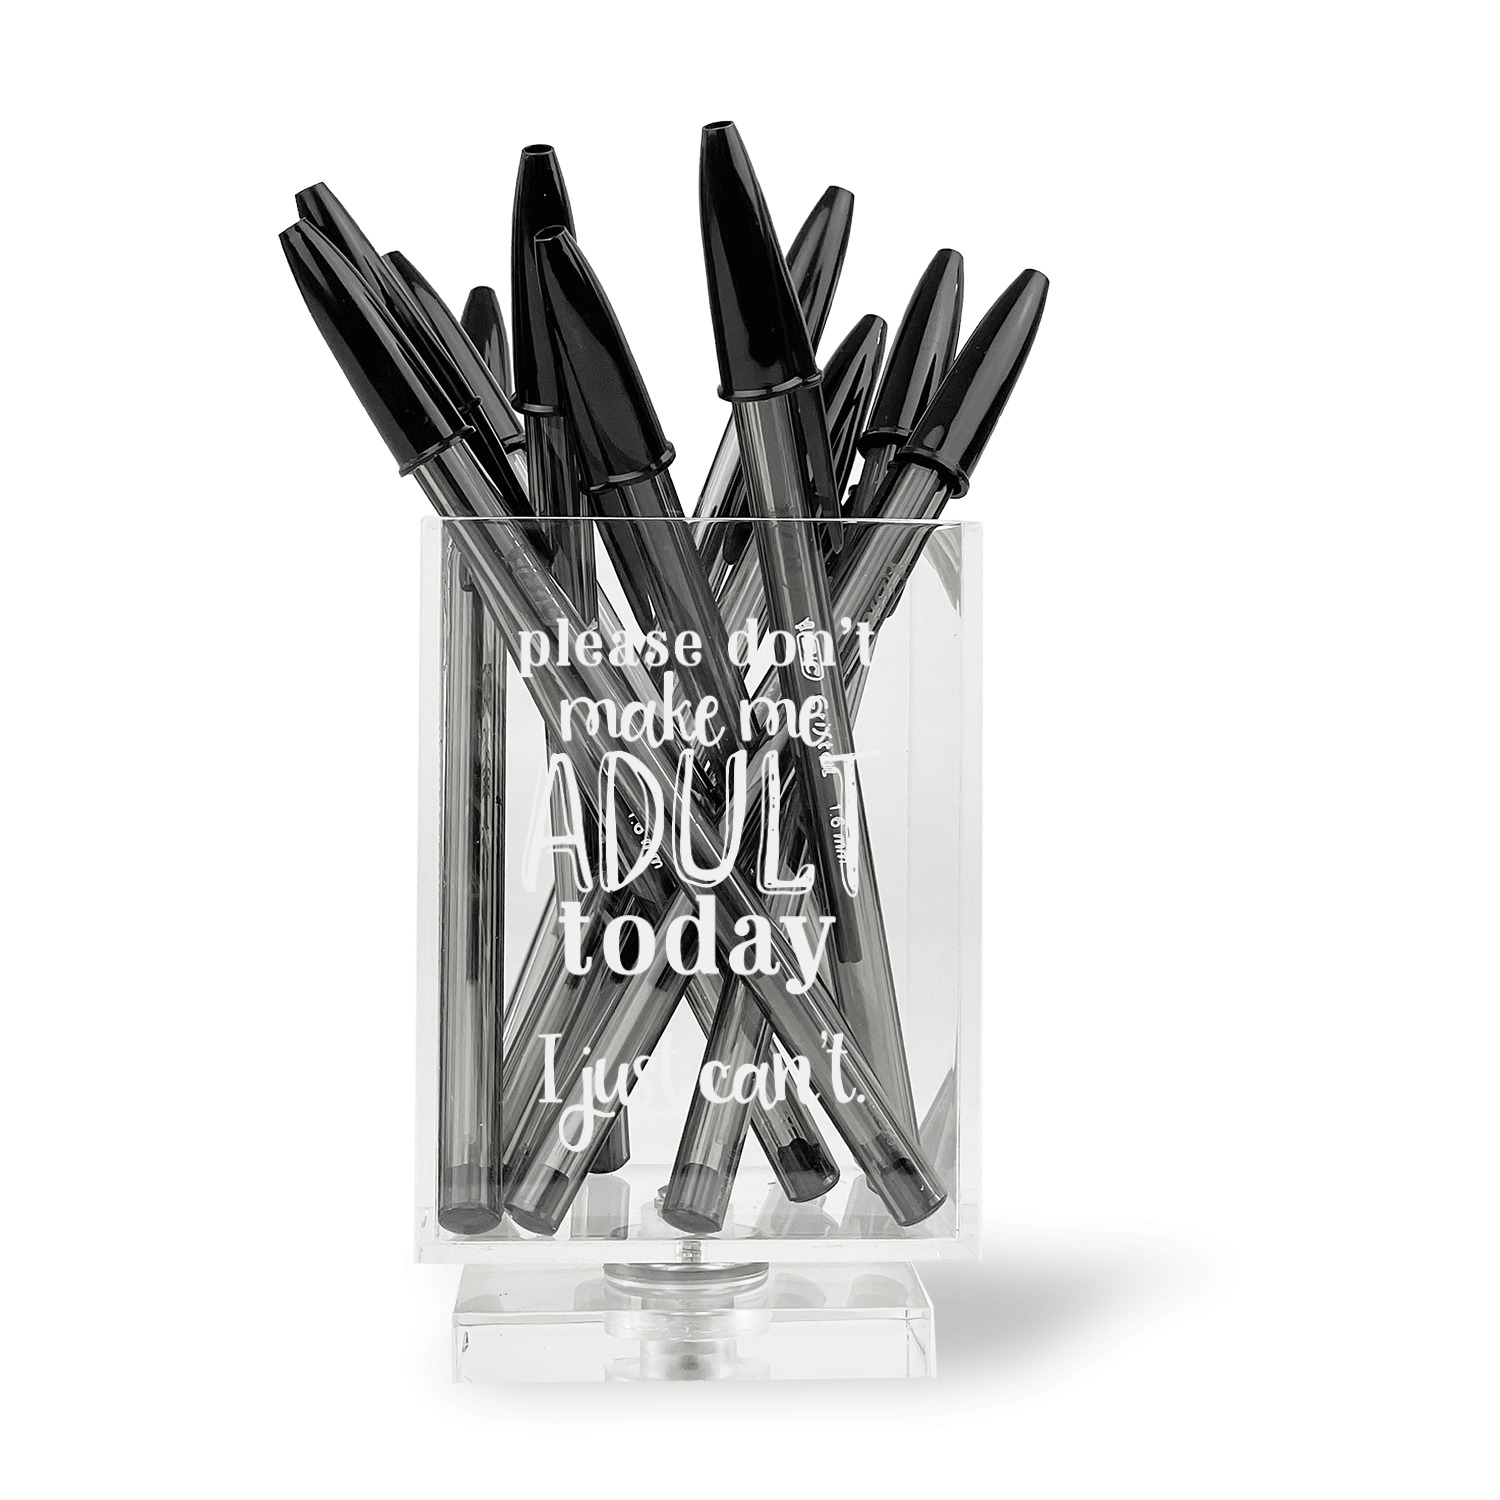 https://www.youcustomizeit.com/common/MAKE/1038321/Funny-Quotes-and-Sayings-Acrylic-Pencil-Holder-FRONT.jpg?lm=1655152957